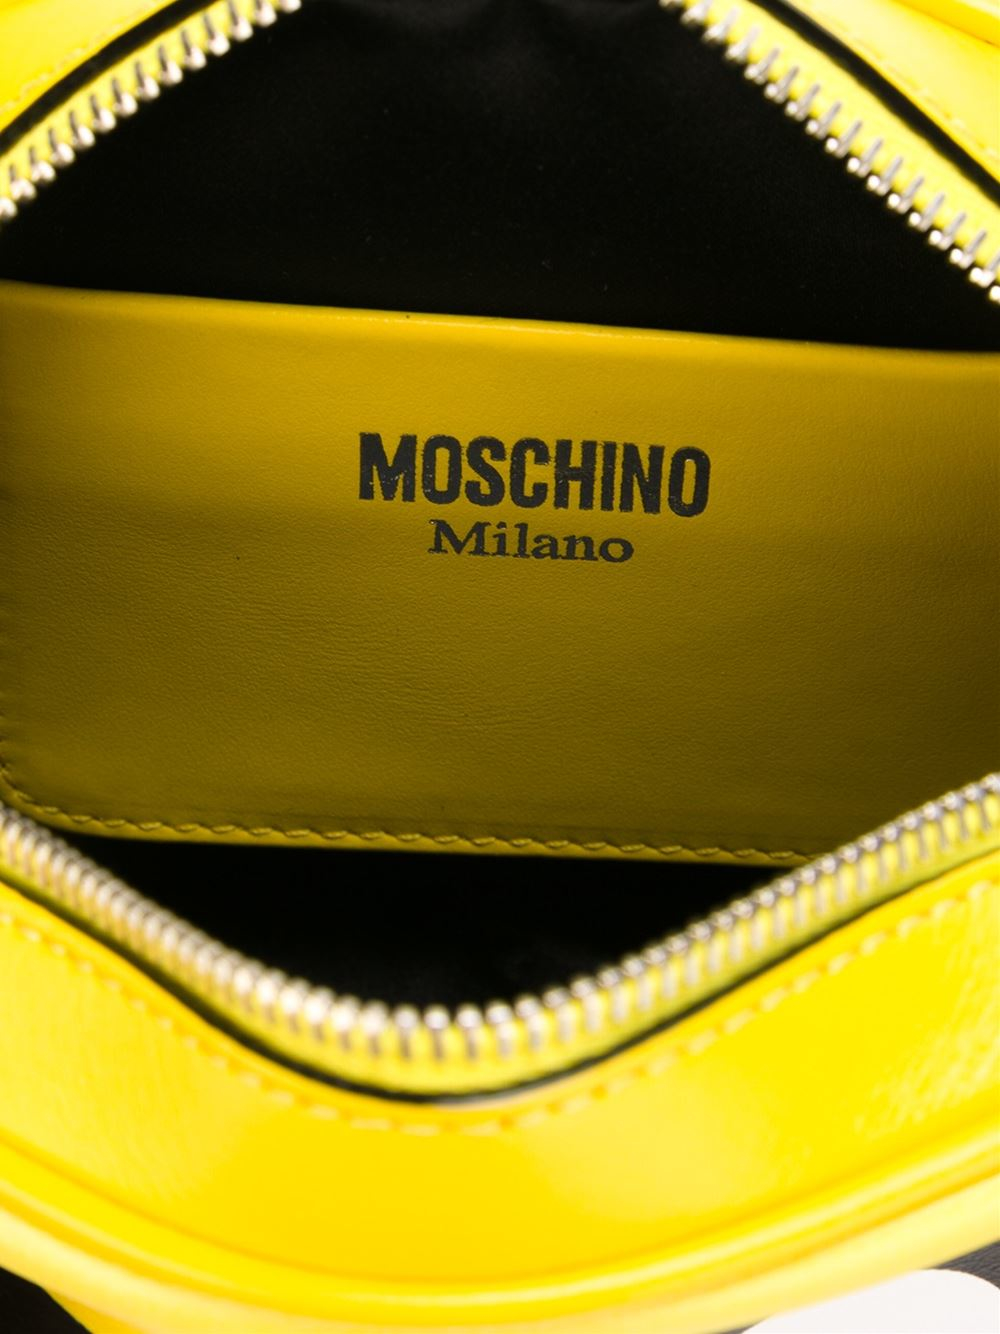 Why Are People Getting So Offended Over This New Moschino Bag? - PopBuzz